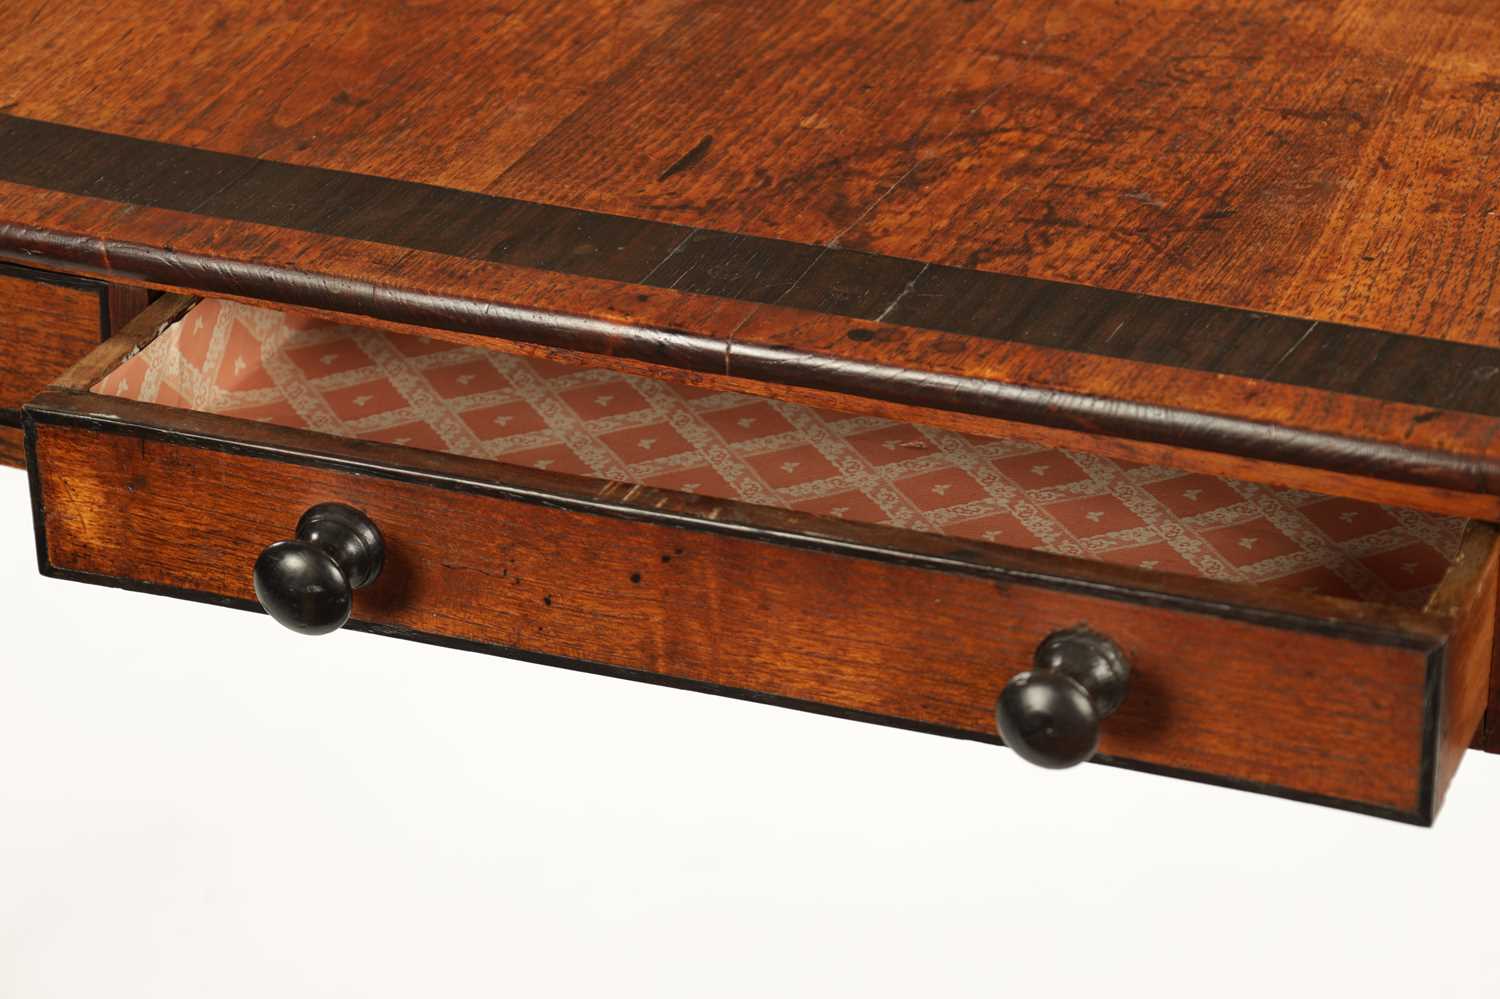 A RARE CANADIAN REGENCY PERIOD ASH AND COROMANDEL SIDE TABLE - Image 2 of 9